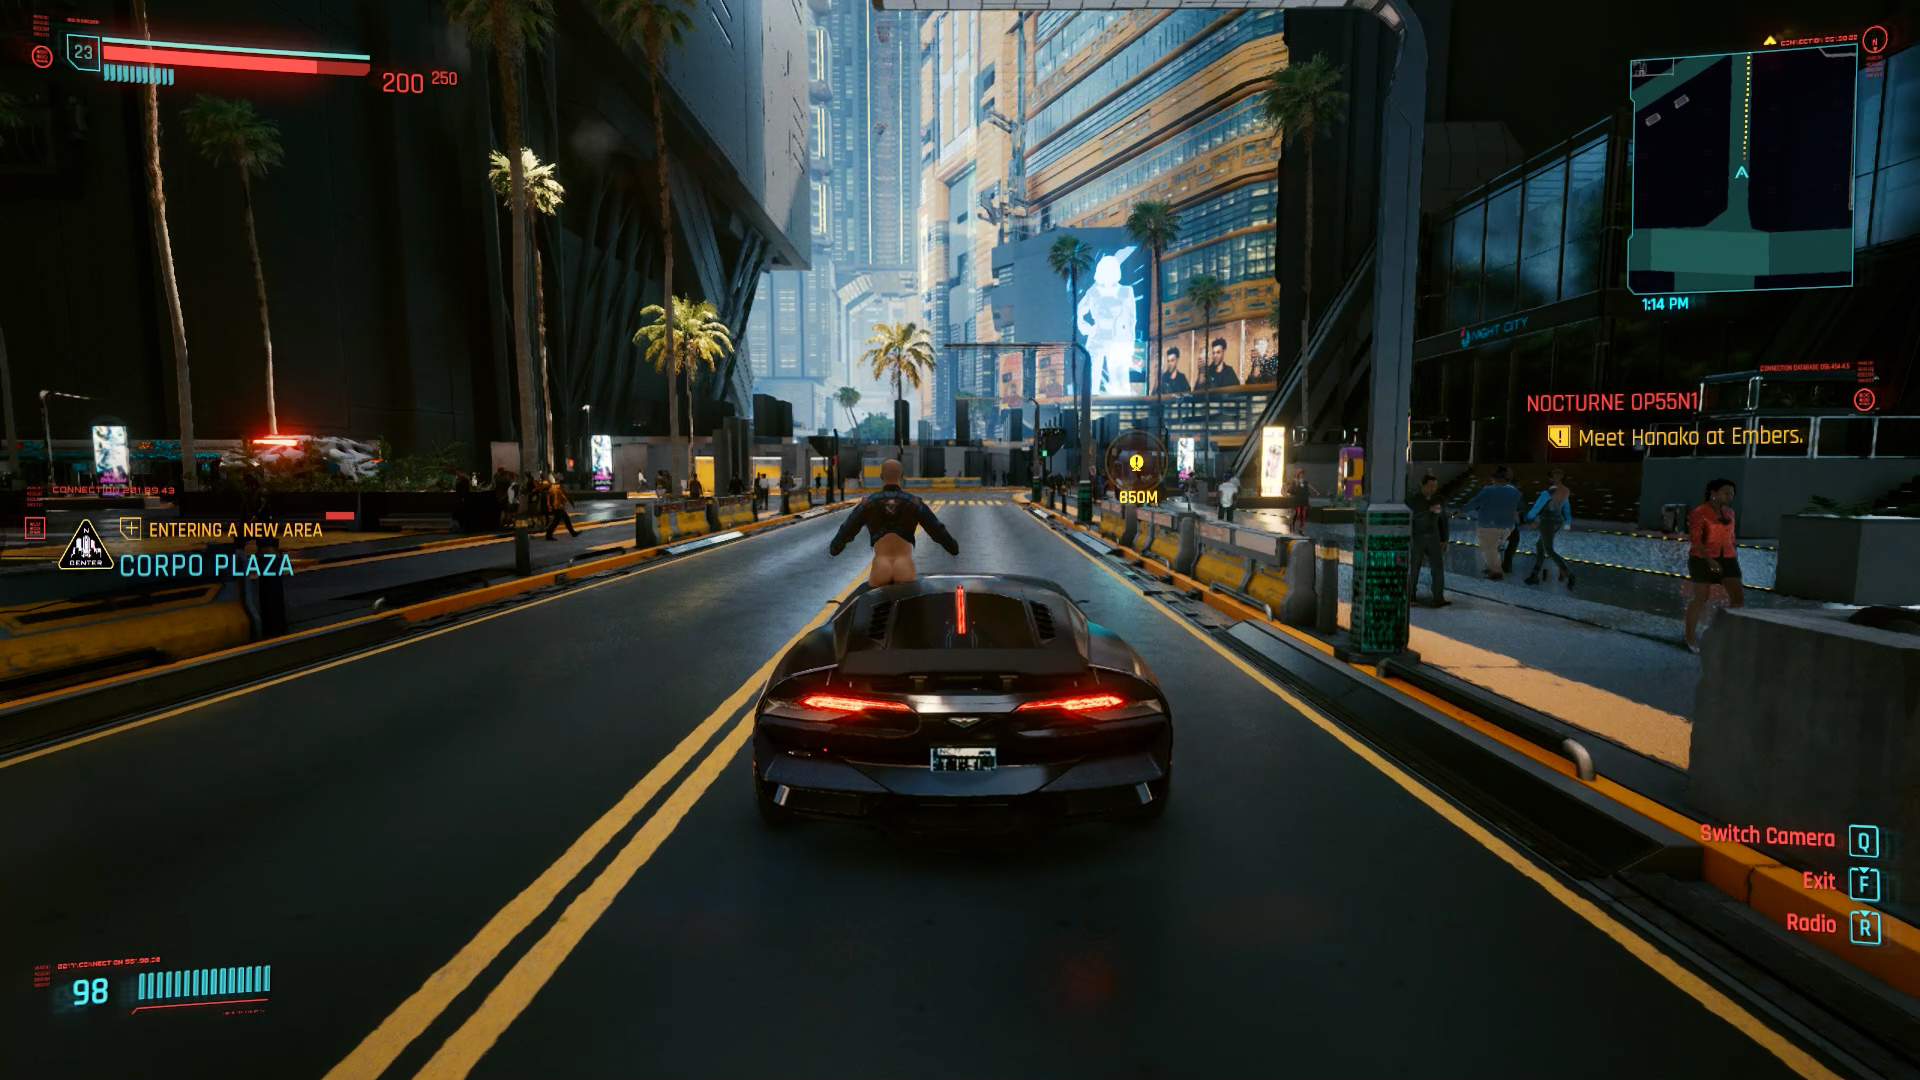 One of Cyberpunk 2077's many glitches, a man riding naked on top of a car